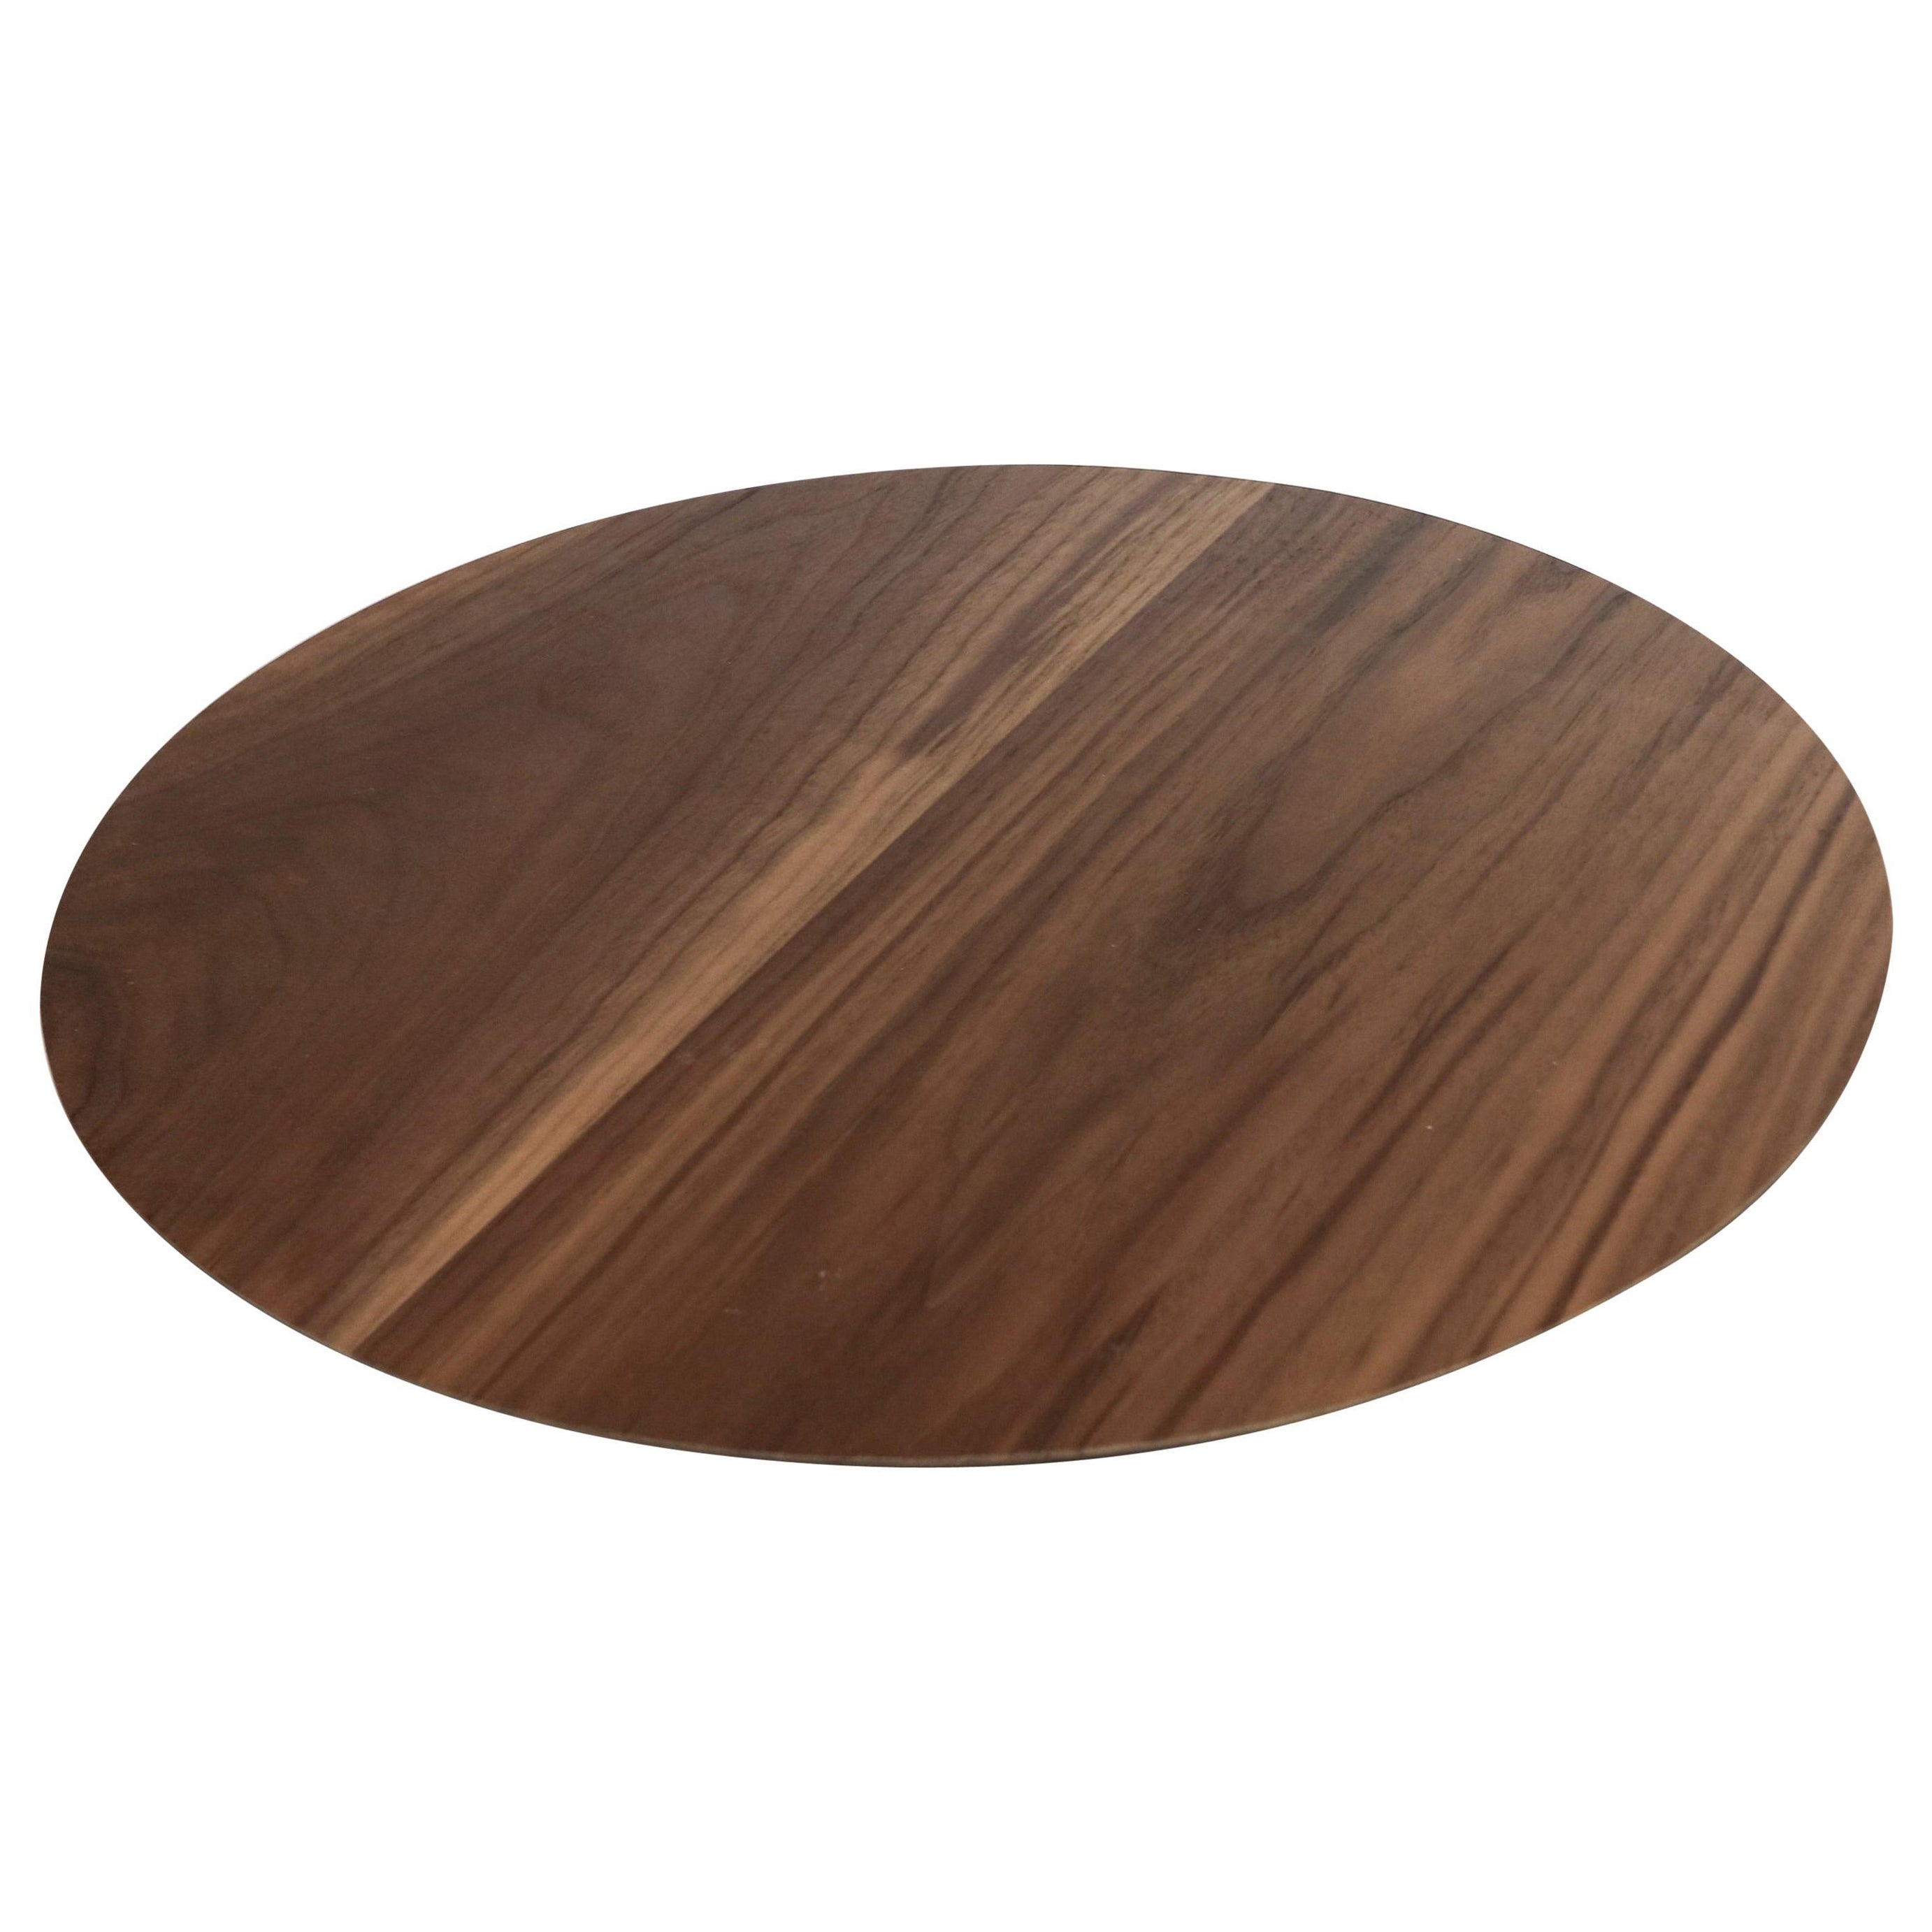 Custom Medium Round Serving Board in Walnut by Adesso Imports For Sale